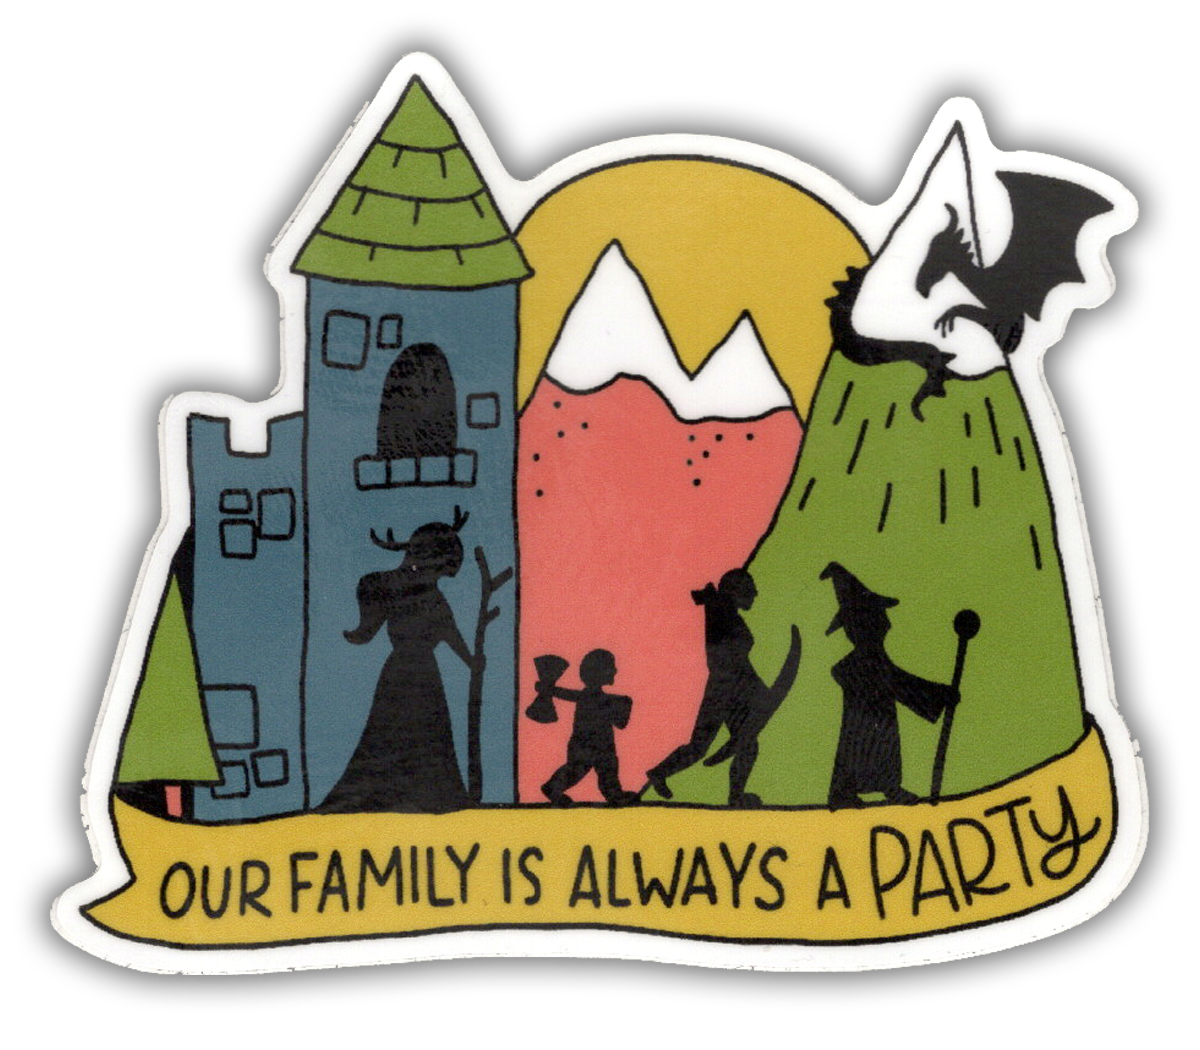 Our Family is Always a Party - D&D vinyl sticker - waterproof, UV-proof